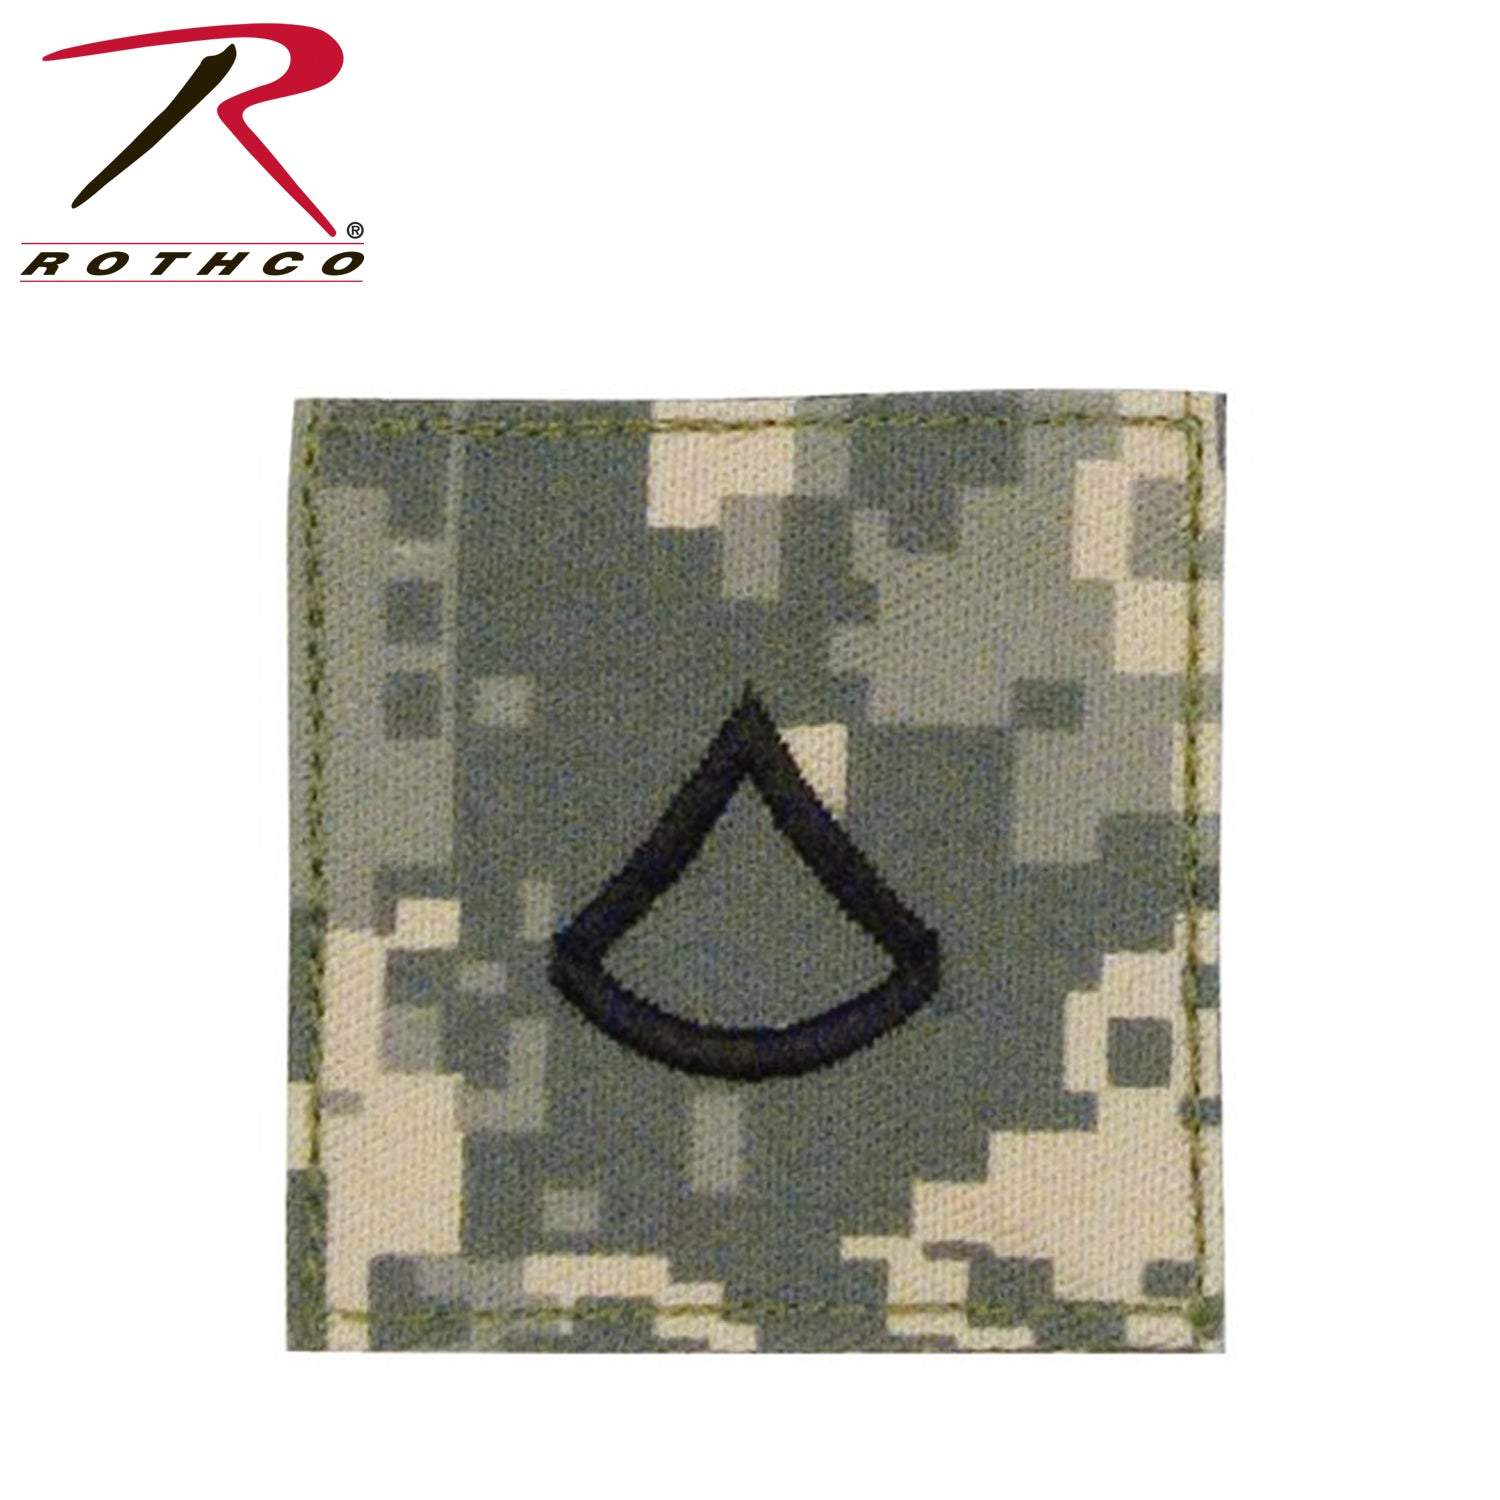 Official U.S. Made Embroidered Rank Insignia - Private 1st Class